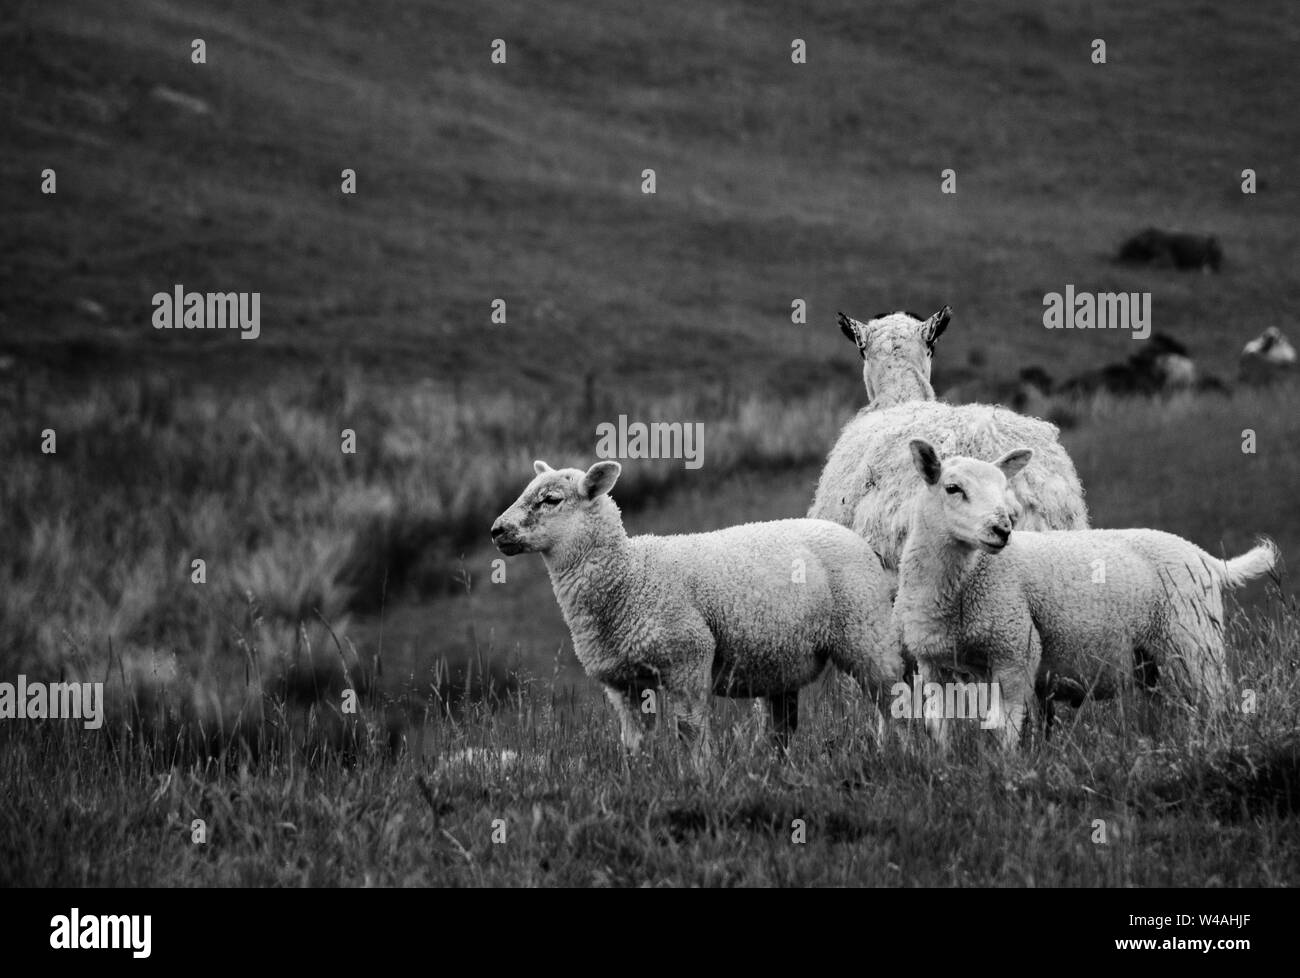 Sheep stands in field with two lambs Stock Photo